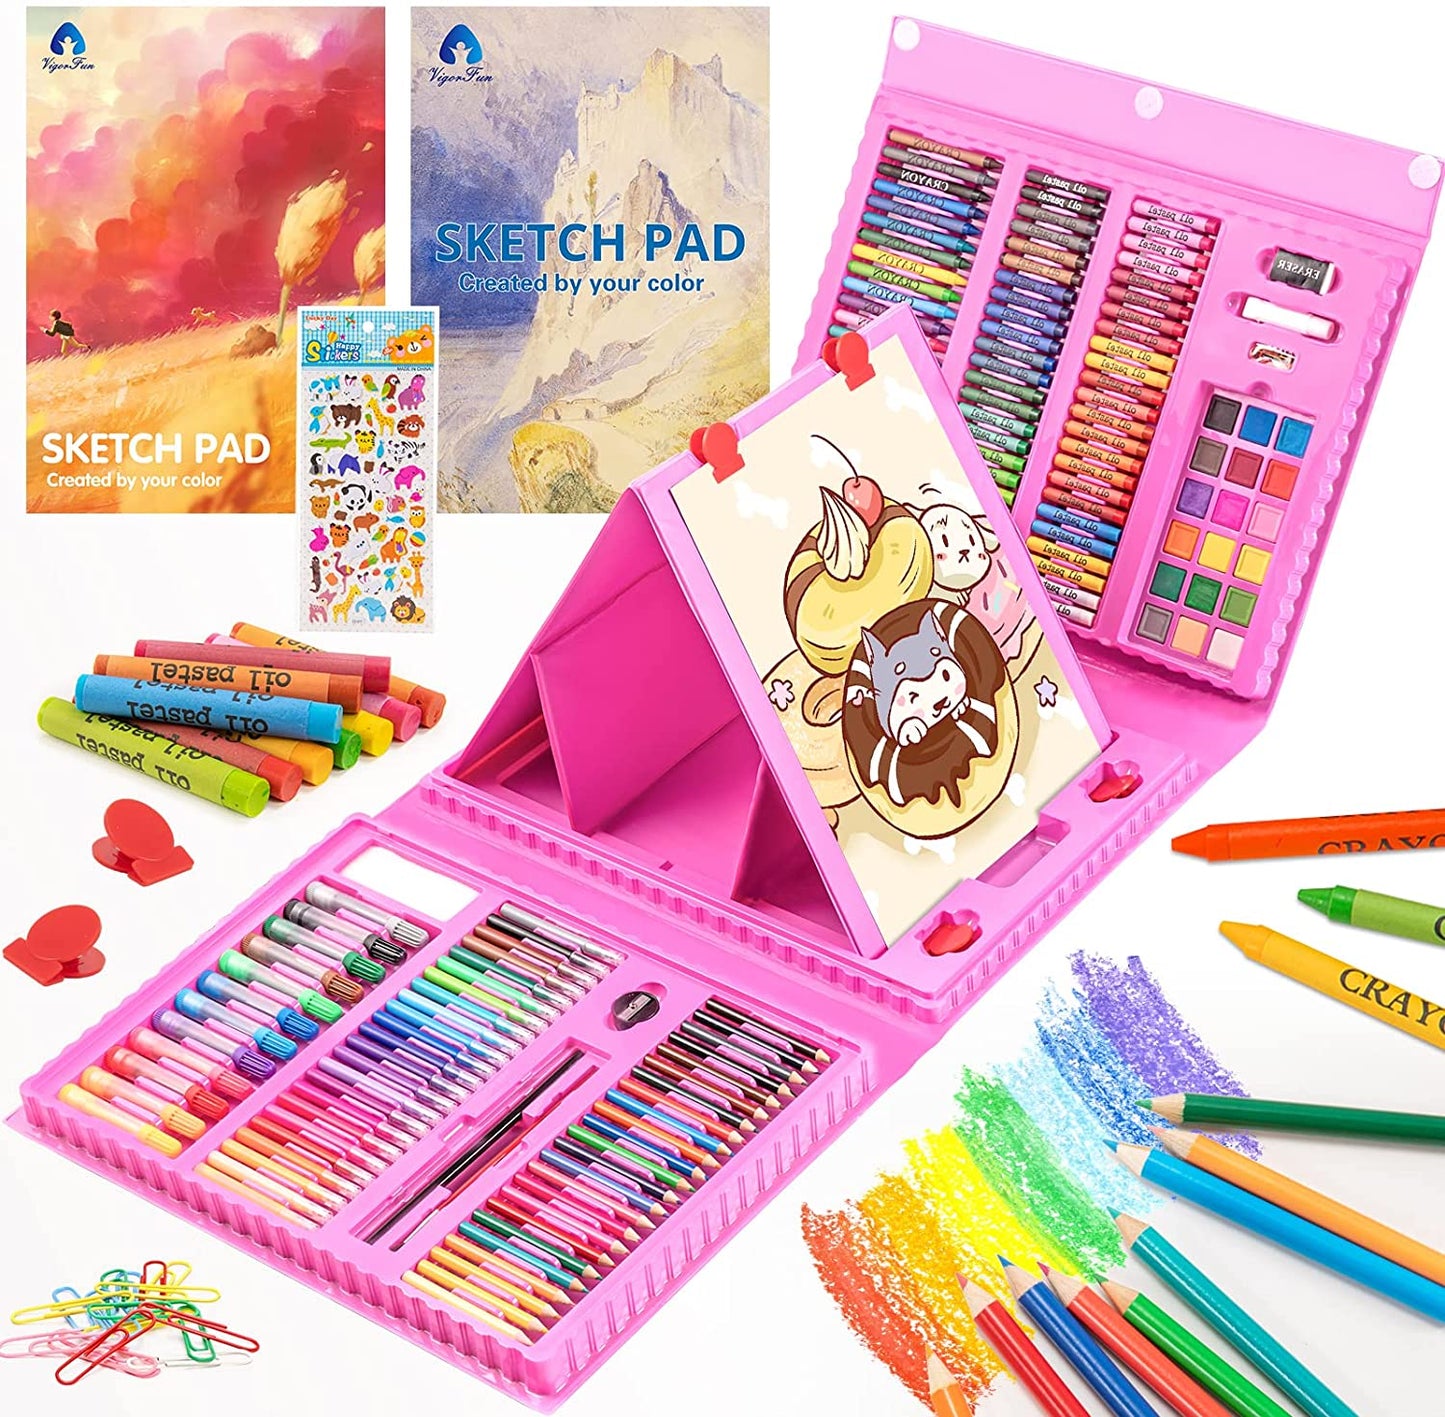 Art Supplies, 240-Piece Drawing Art Kit, Gifts Art Set Case with Double Sided Trifold Easel, Includes Oil Pastels, Crayons, Colored Pencils, Watercolor Cakes, Sketch Pad (Pink)